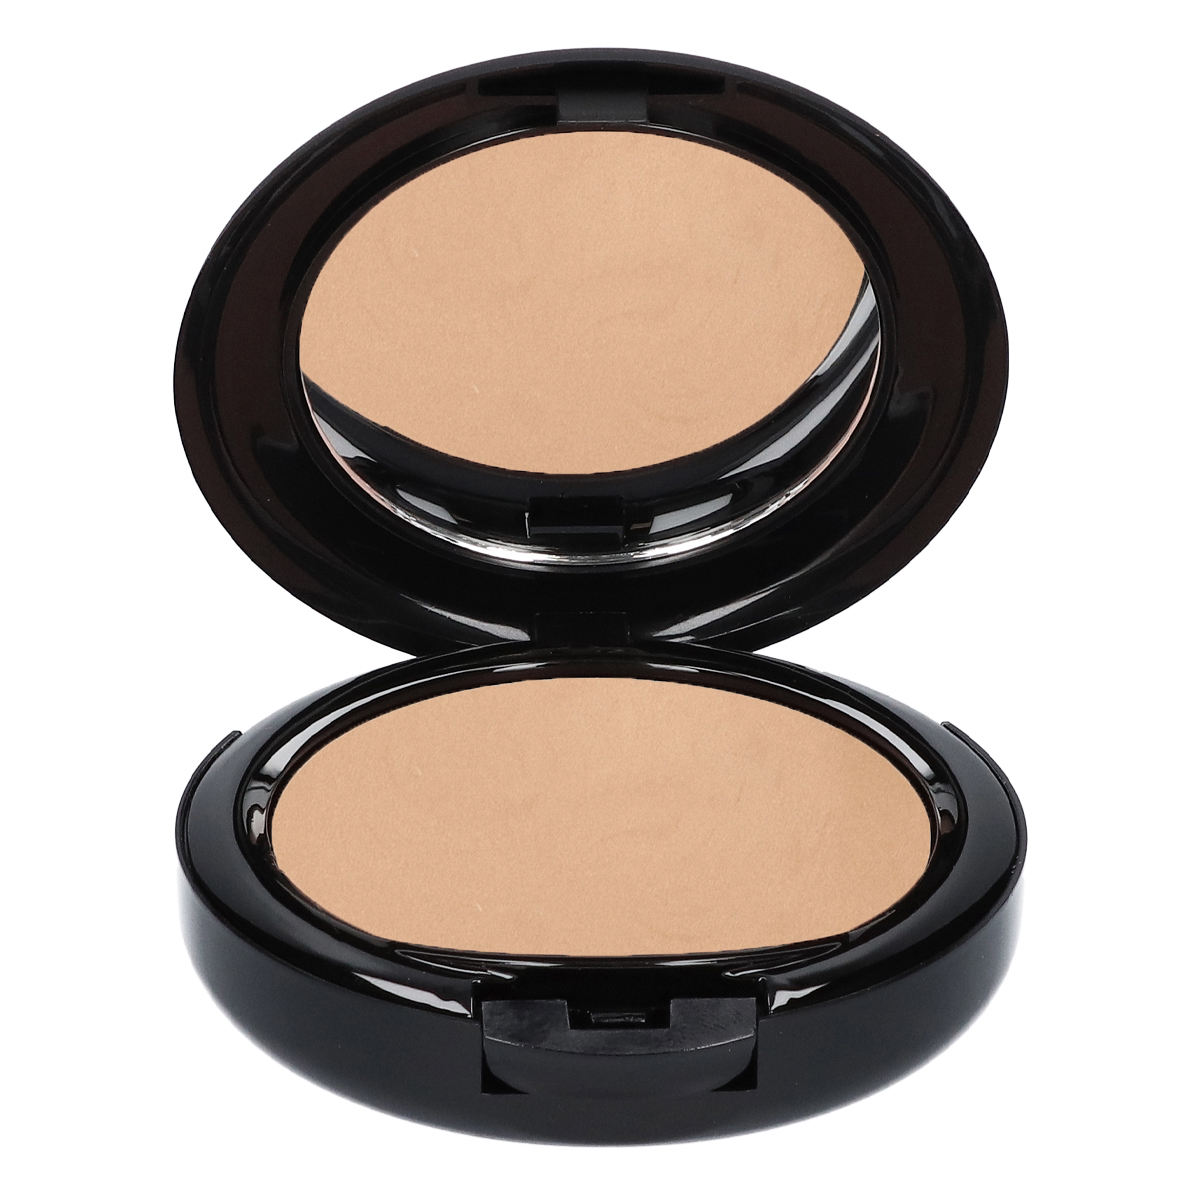 Face It Light Cream Foundation - WB3 Natural Beige